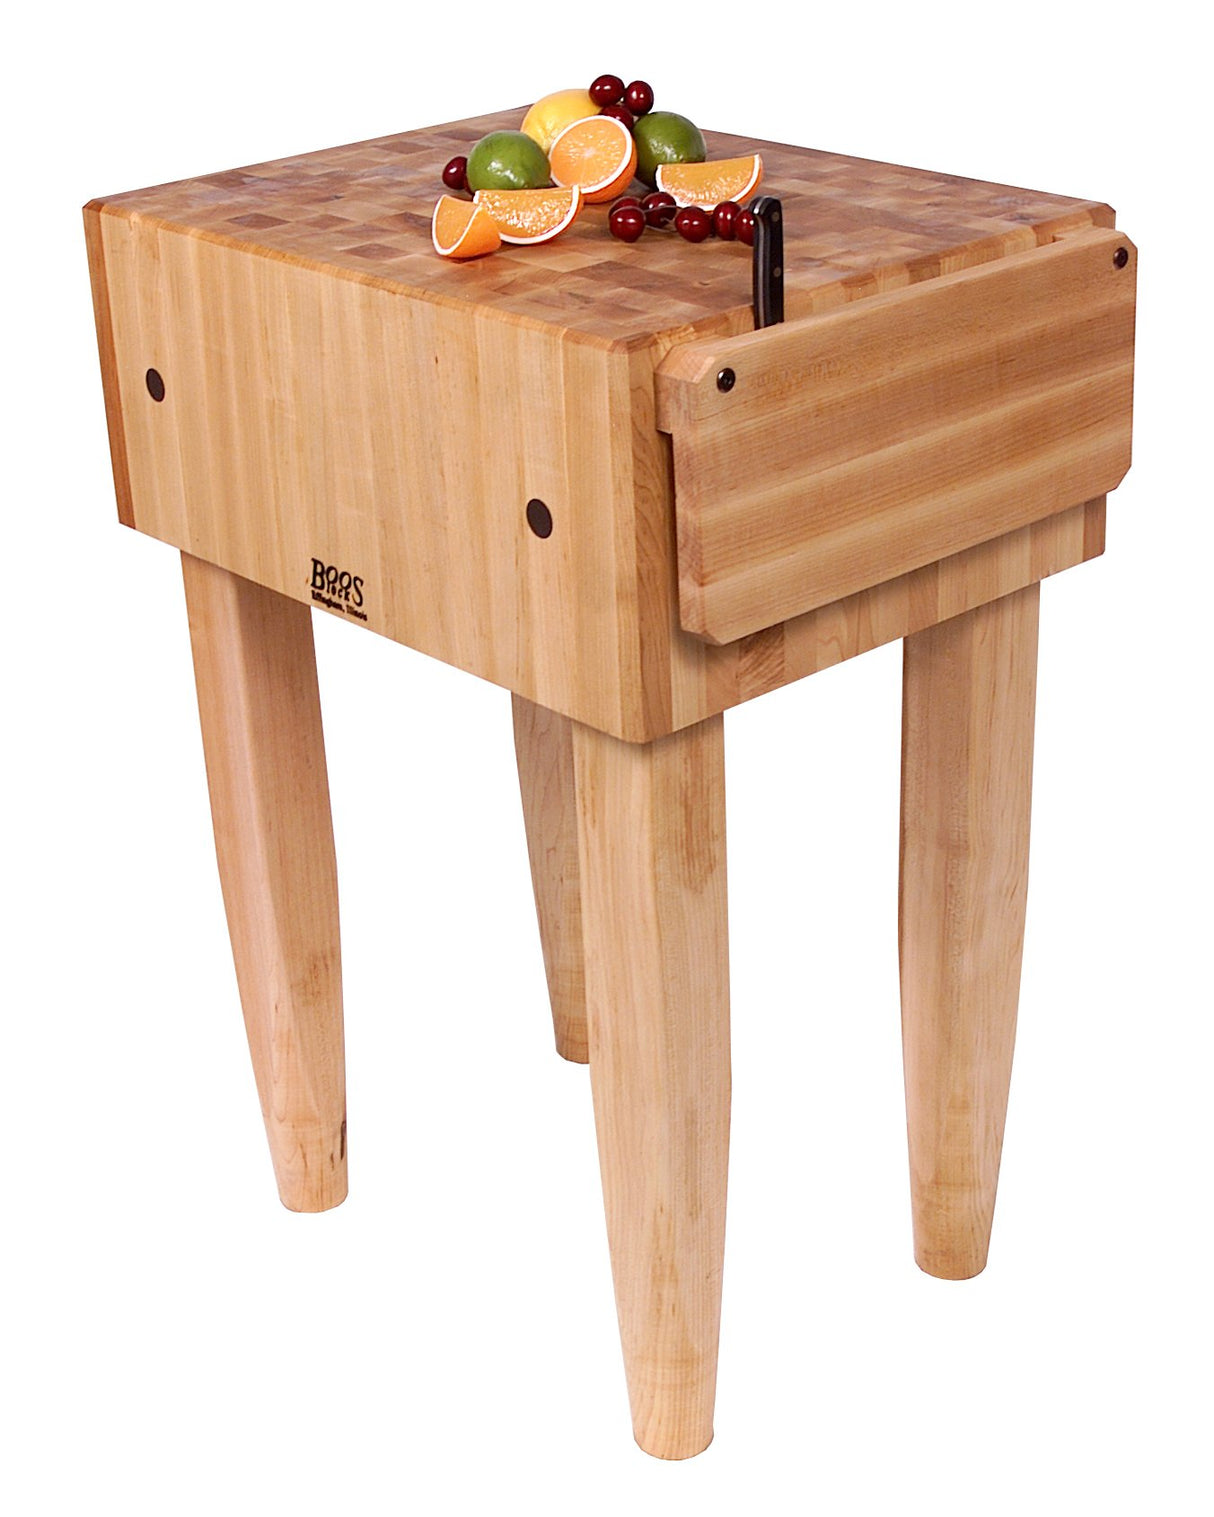 John Boos PCA2-C Pca2 24x18x10" Maple Butcher Block w/Knife Holder and Casters PCA BLOCK 24X18X10 W/HOLDER/CAS CRM